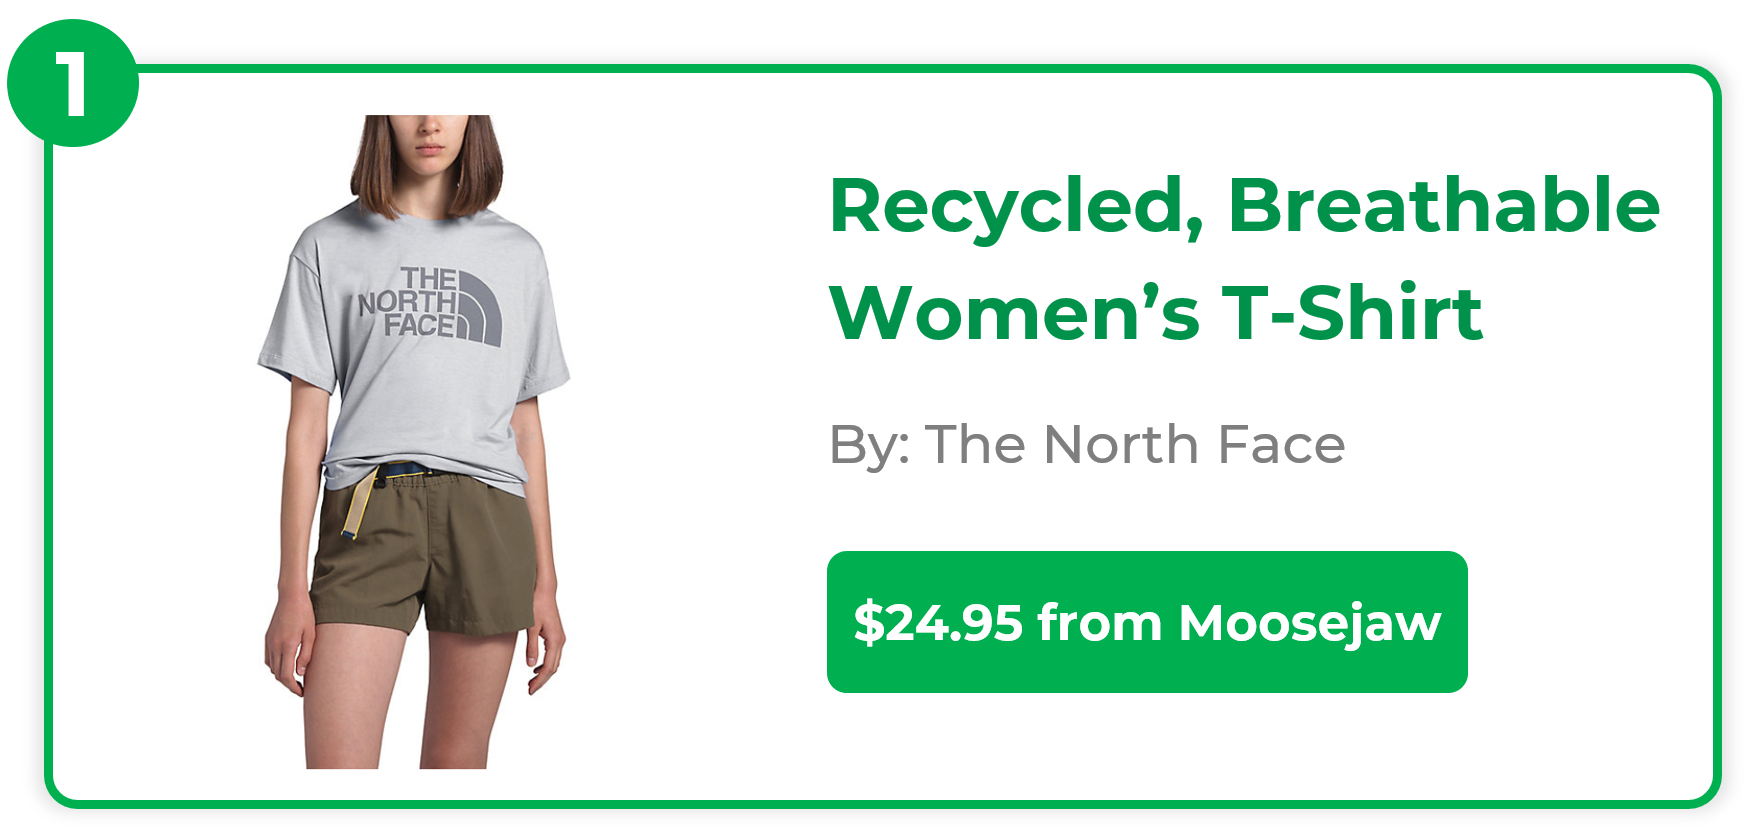 Recycled, Breathable Women’s T-Shirt - The North Face